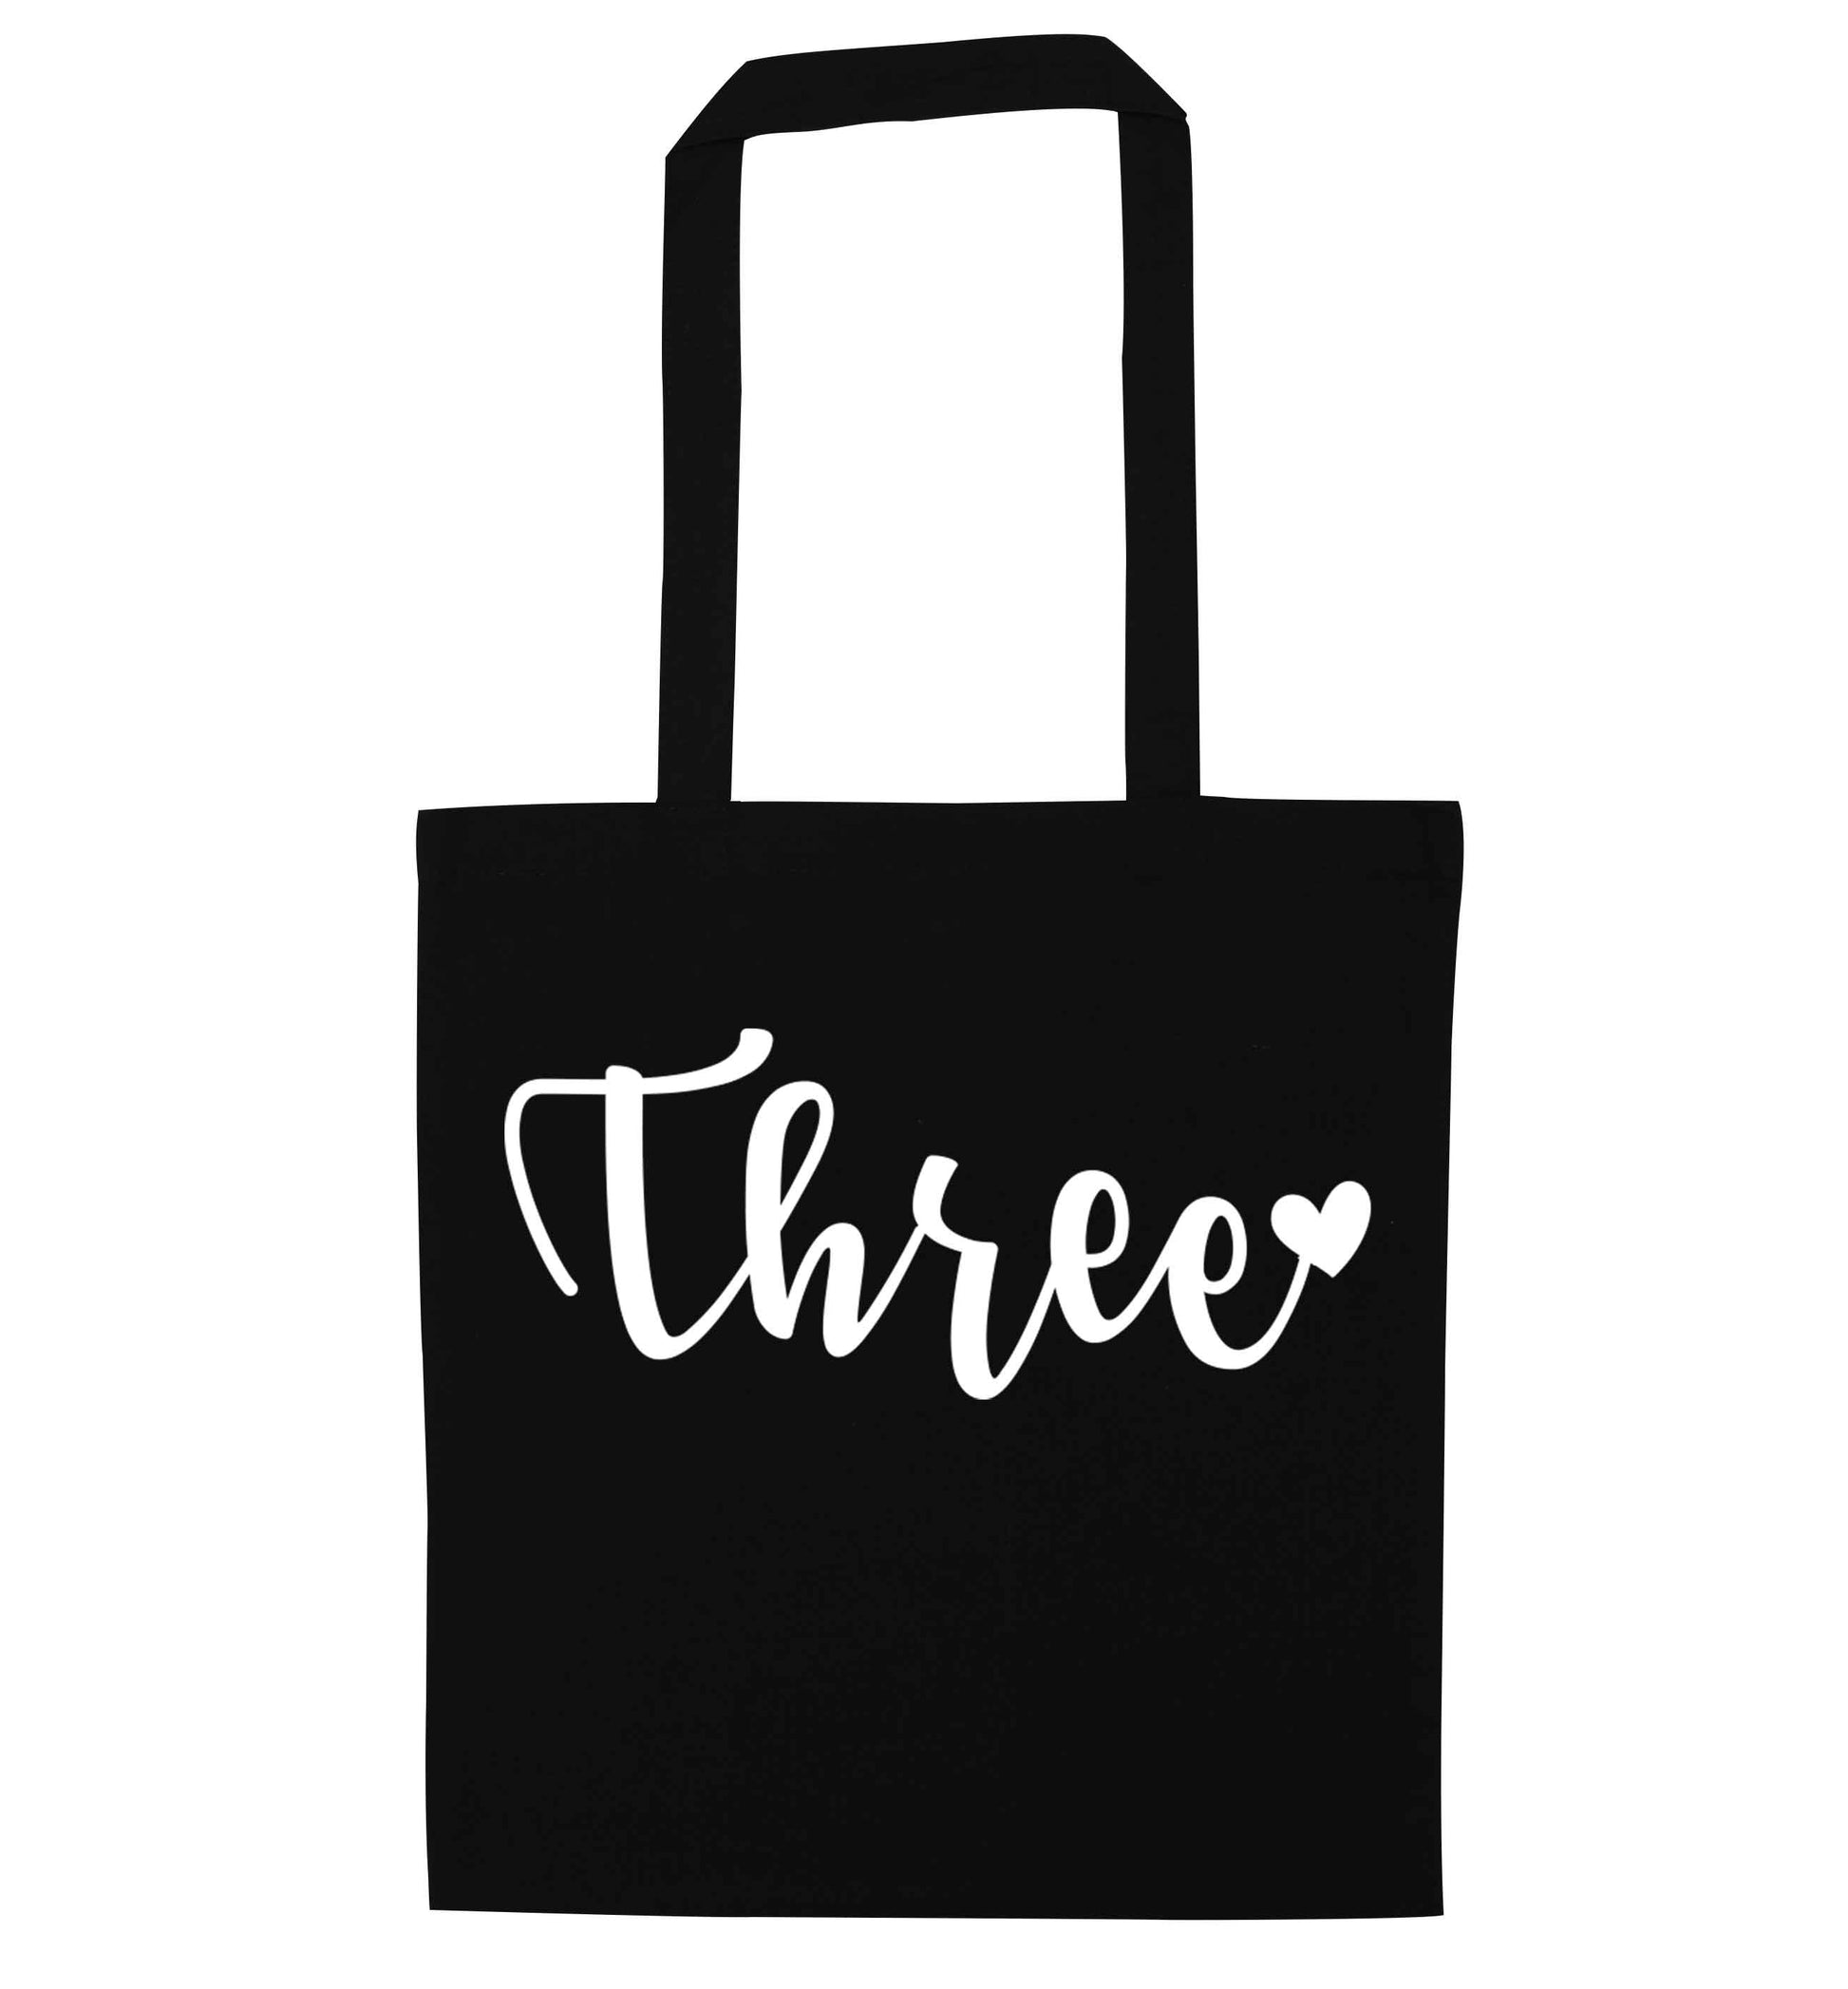 Two and Heart black tote bag